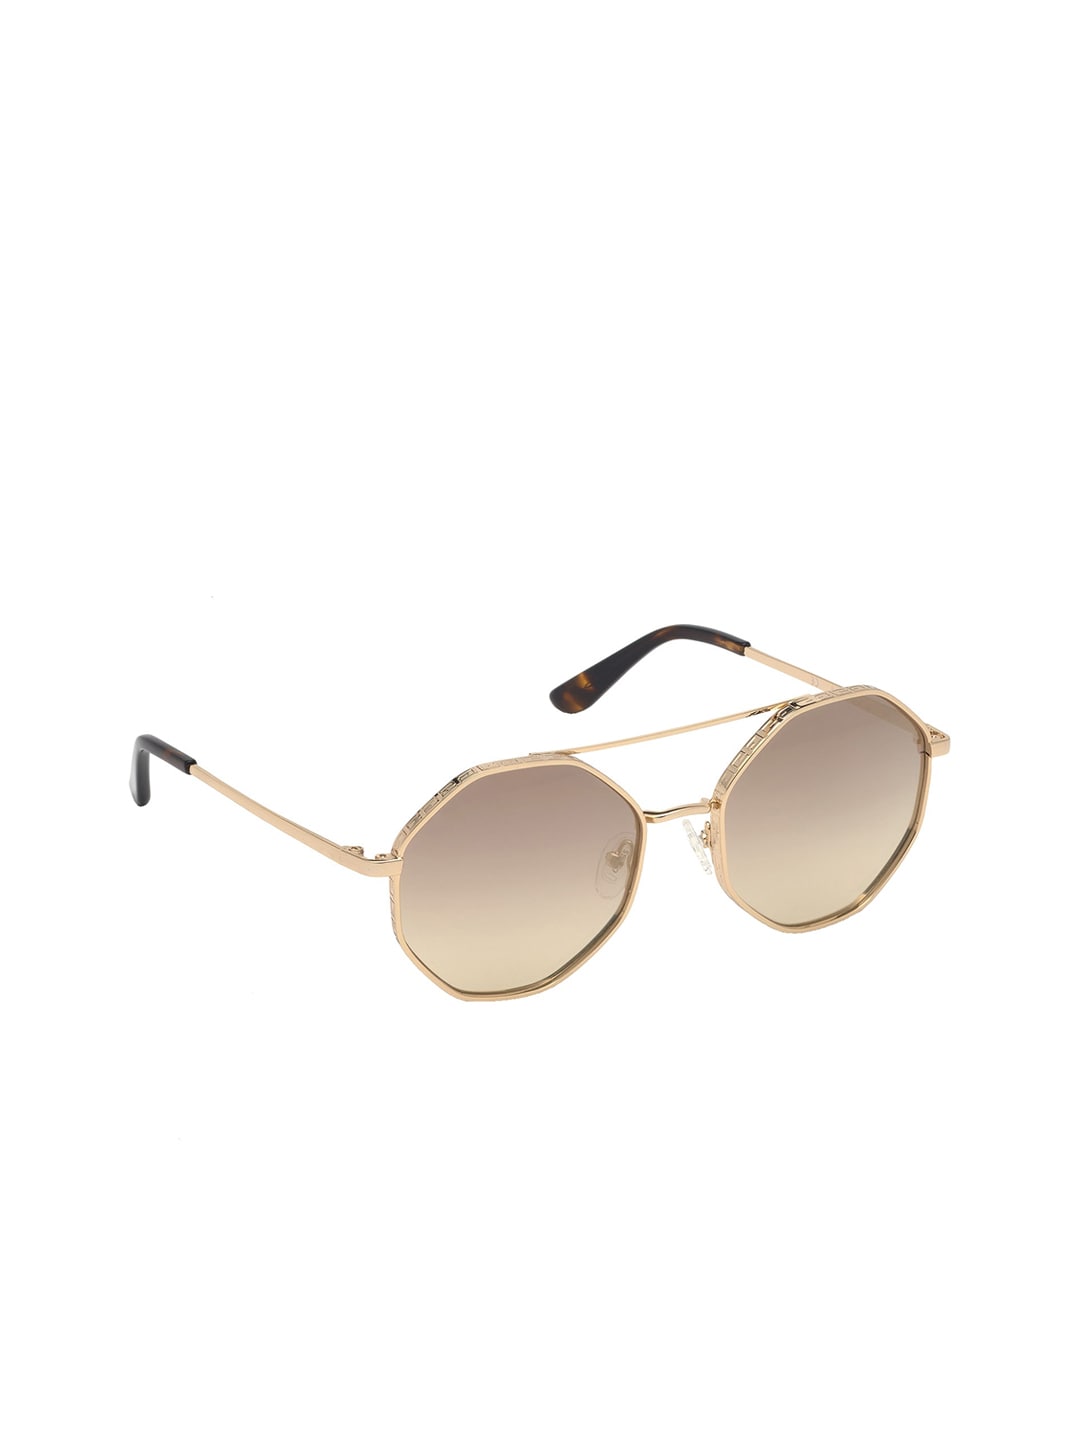 GUESS Women Brown Lens & Gold-Toned Other Sunglasses with UV Protected Lens GU7636 55 32C Price in India